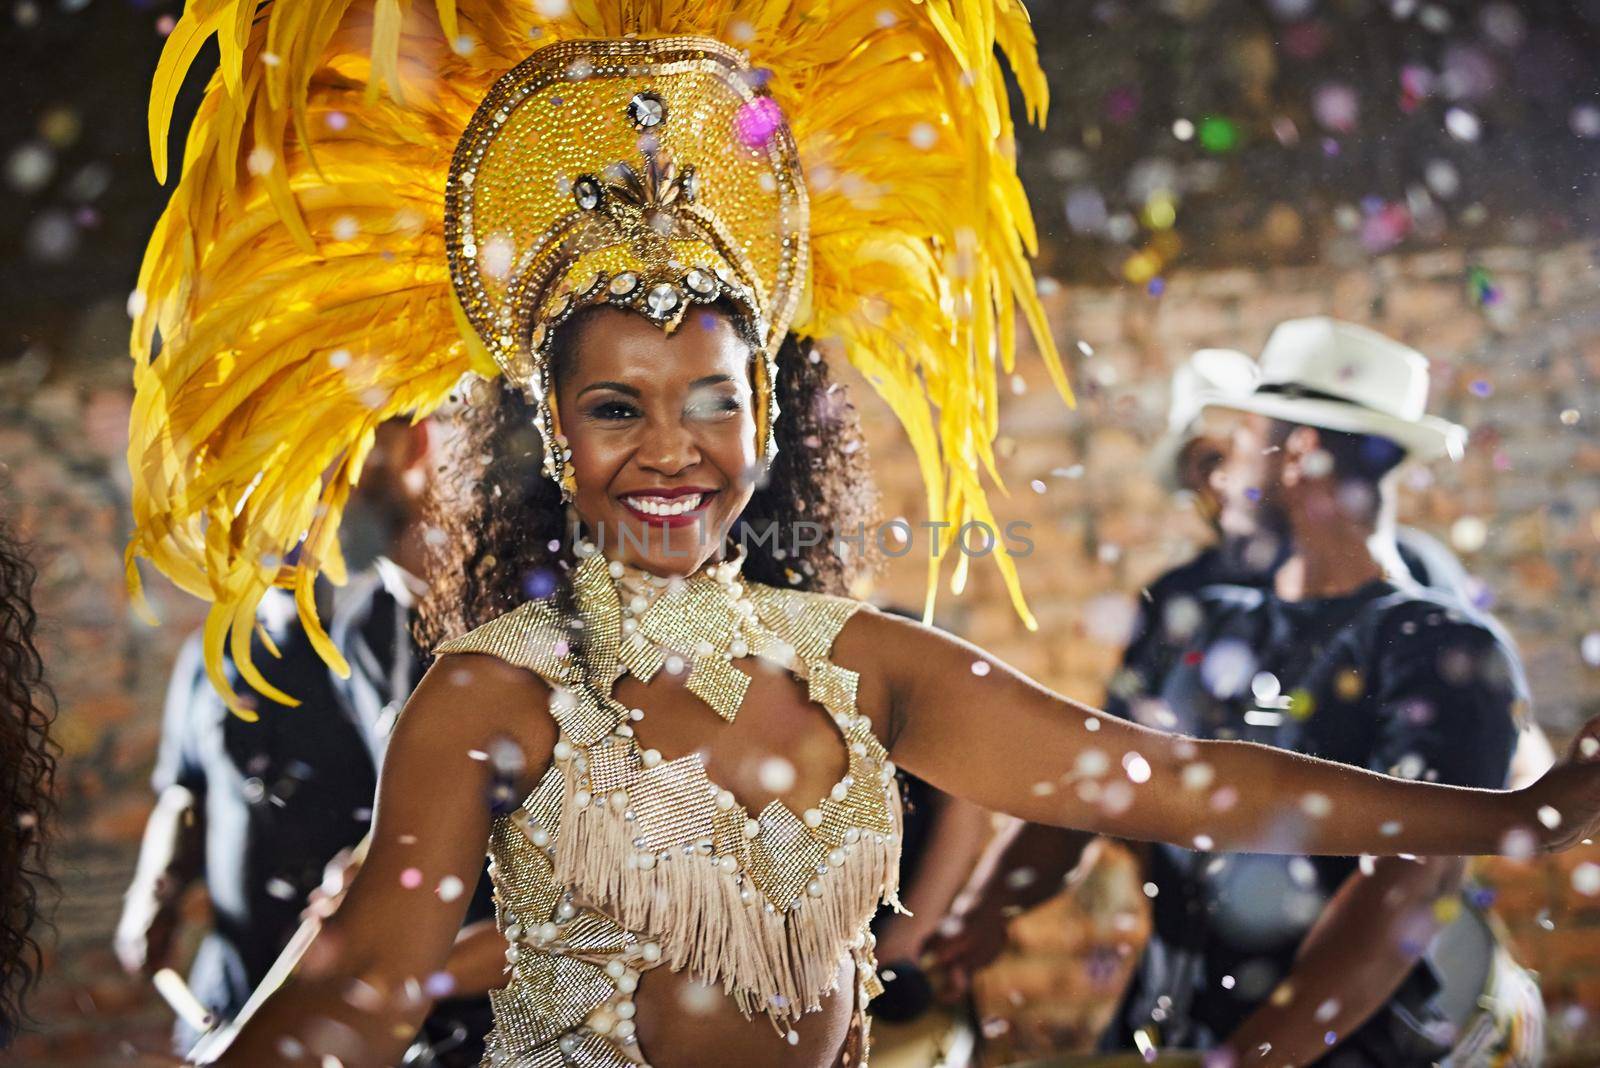 Portrait of a samba dancer performing in a carnival.